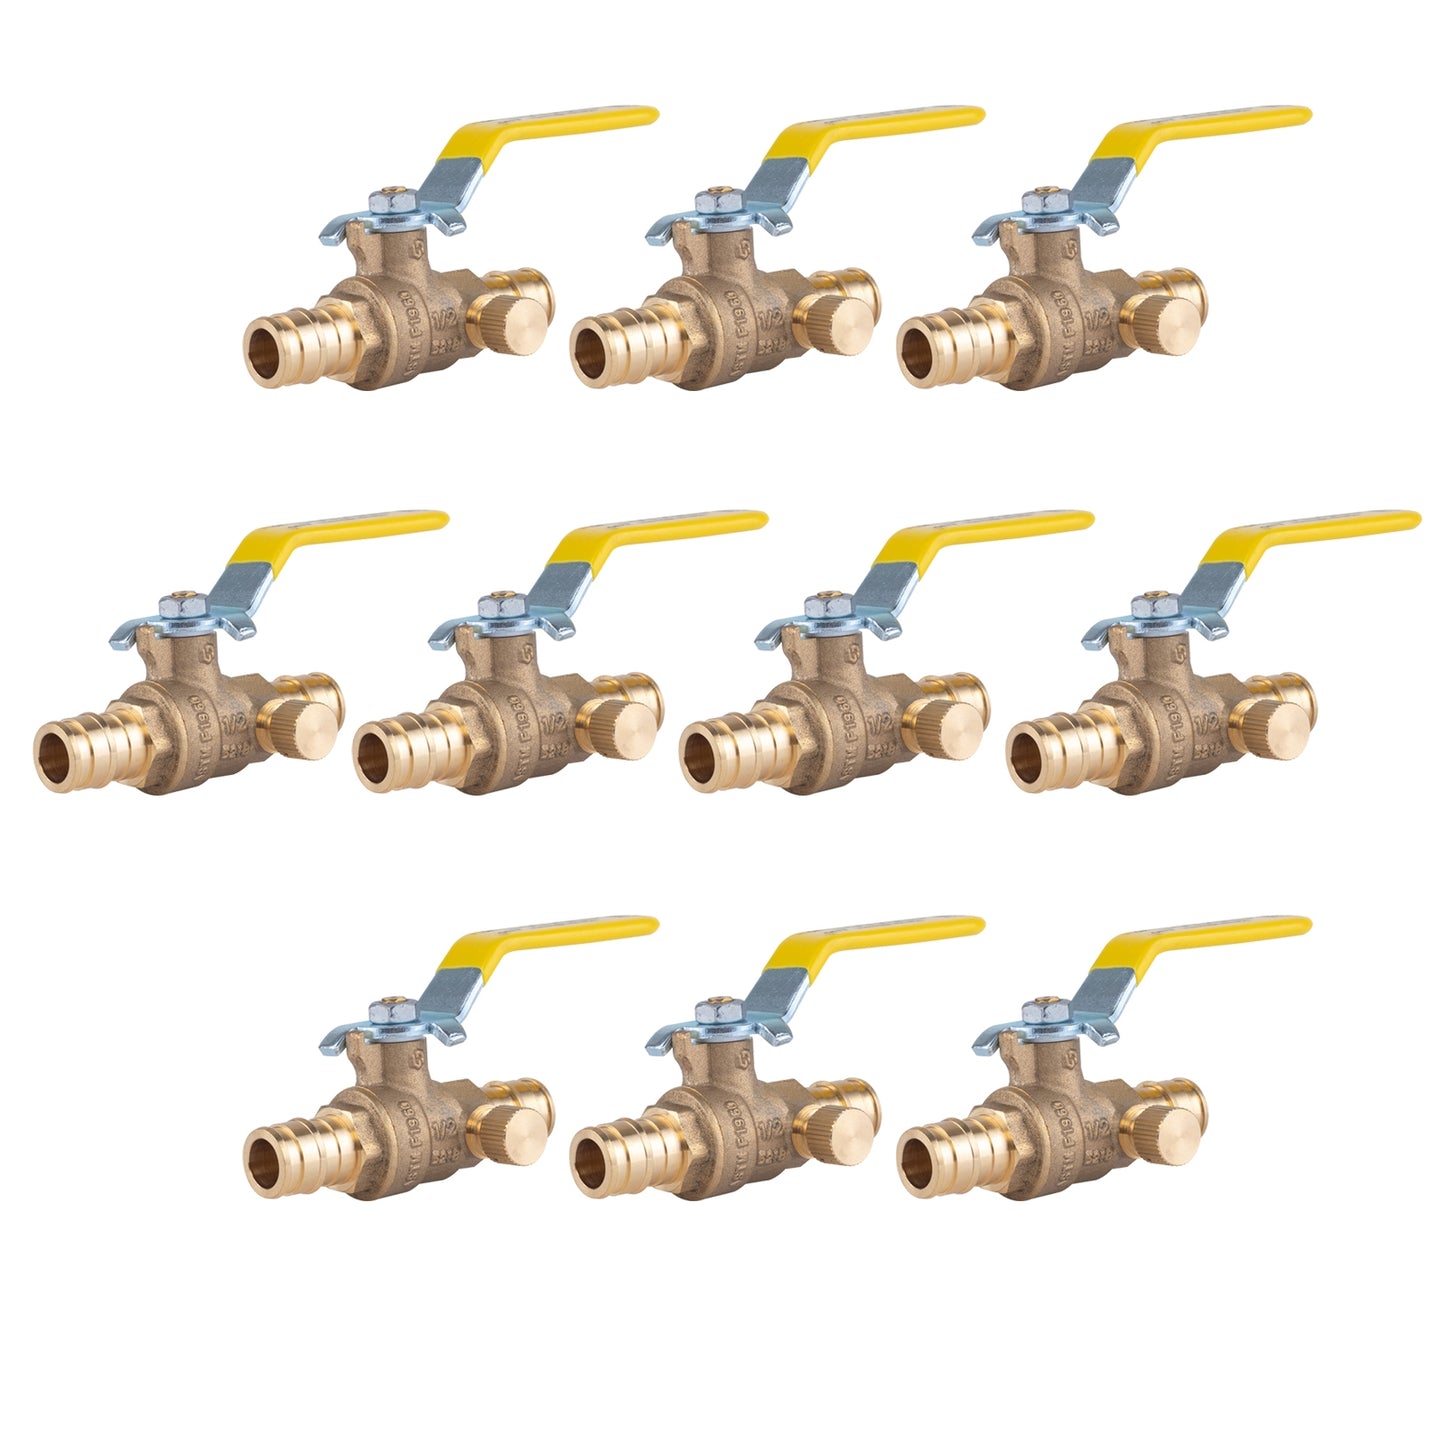 Hausen 1/2-inch PEX Standard Port Brass Ball Valve with Drain; Lead Free Forged Brass; Blowout Resistant Stem; cUPC/ANSI/NSF Certified; For Use in Potable Water, Oil and Gas Distribution Systems, 10-Pack